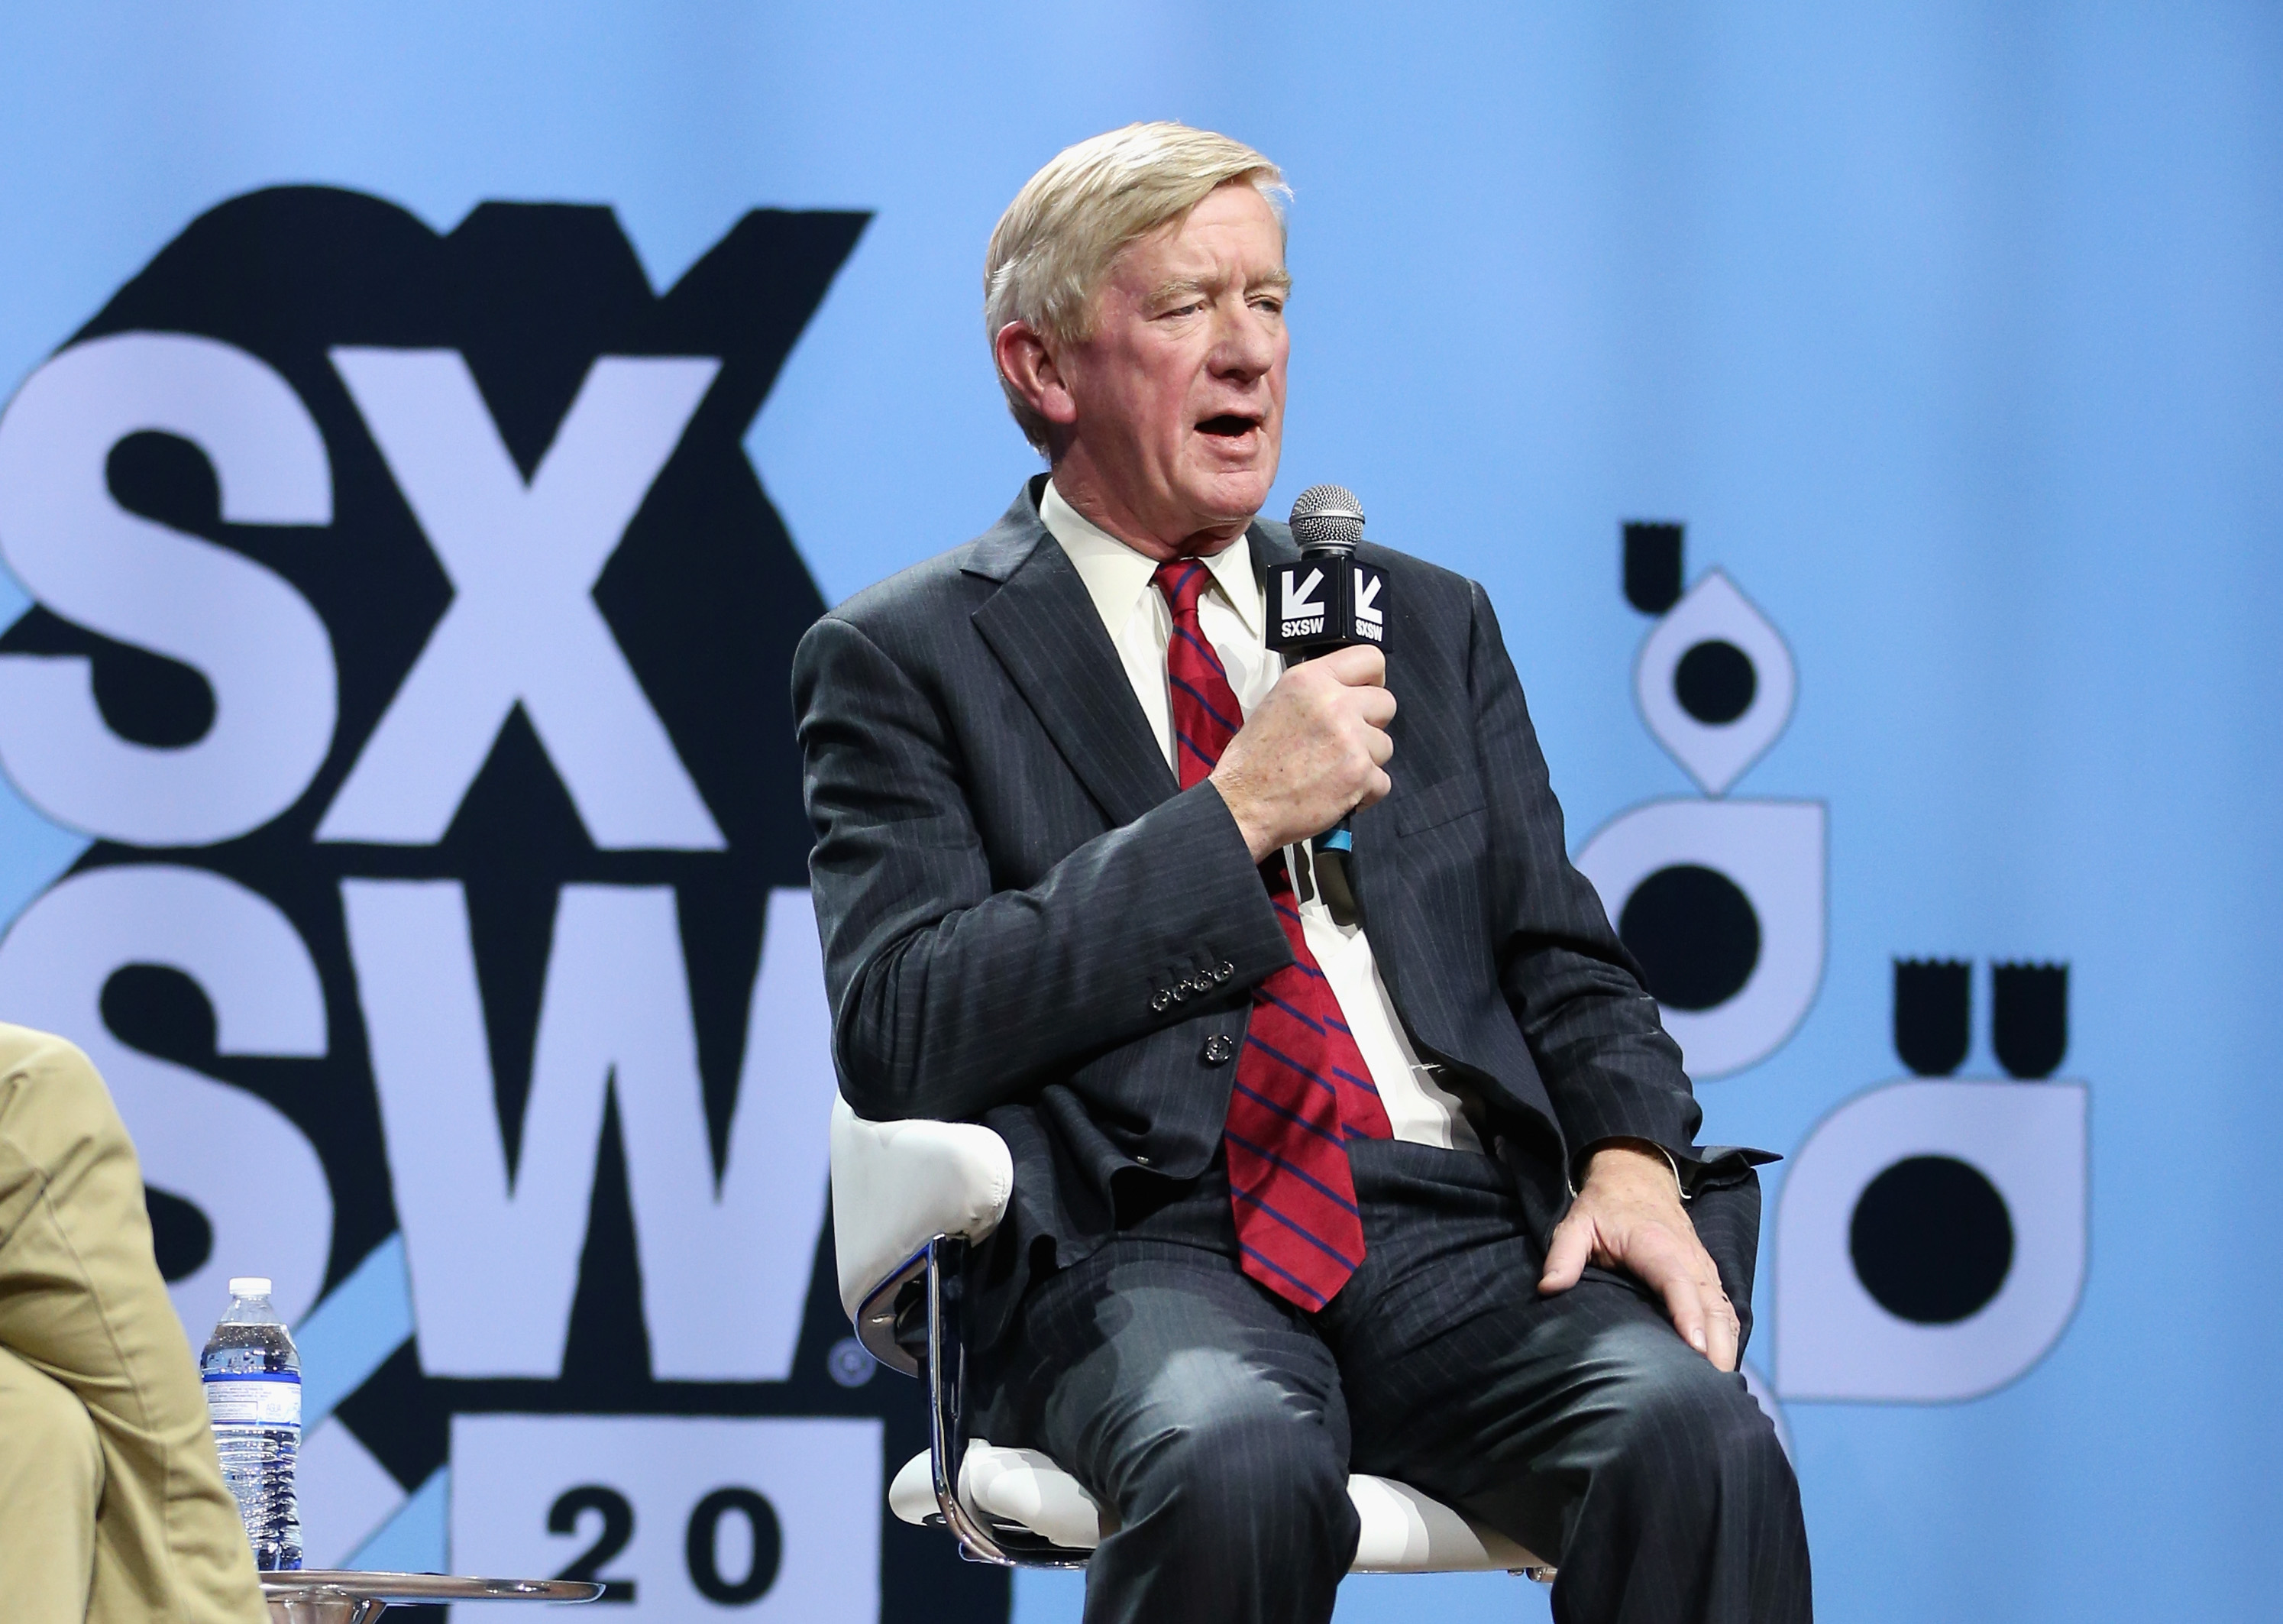 Bill Weld speaks onstage at Conversations About America's Future: Former Governor Bill Weld during the 2019 SXSW Conference and Festivals at Austin City Limits Live at the Moody Theater on March 8, 2019 in Austin, Texas. (Hutton Supancic—Getty Images for SXSW)